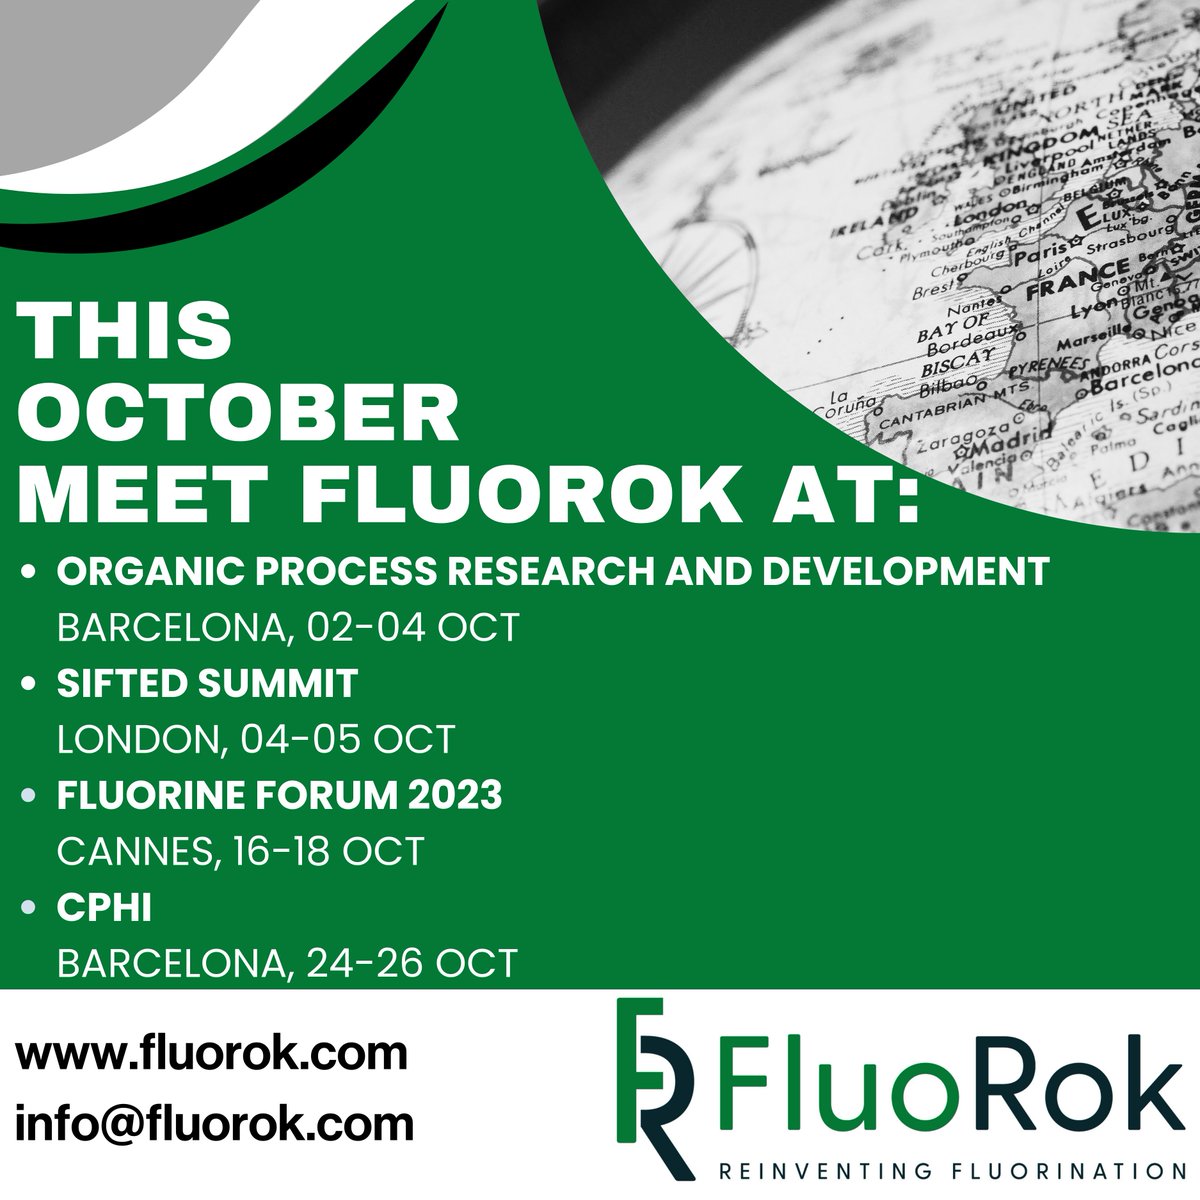 @Fluo_Rok is hitting the road this October. We'd love to chat about how our ground-breaking HF-free fluorination technology will make the world a safer and cleaner place. #oprd #SiftedSummit #fluorine #cphi #fluoRok #fluorination #fluorochemicalrevolution